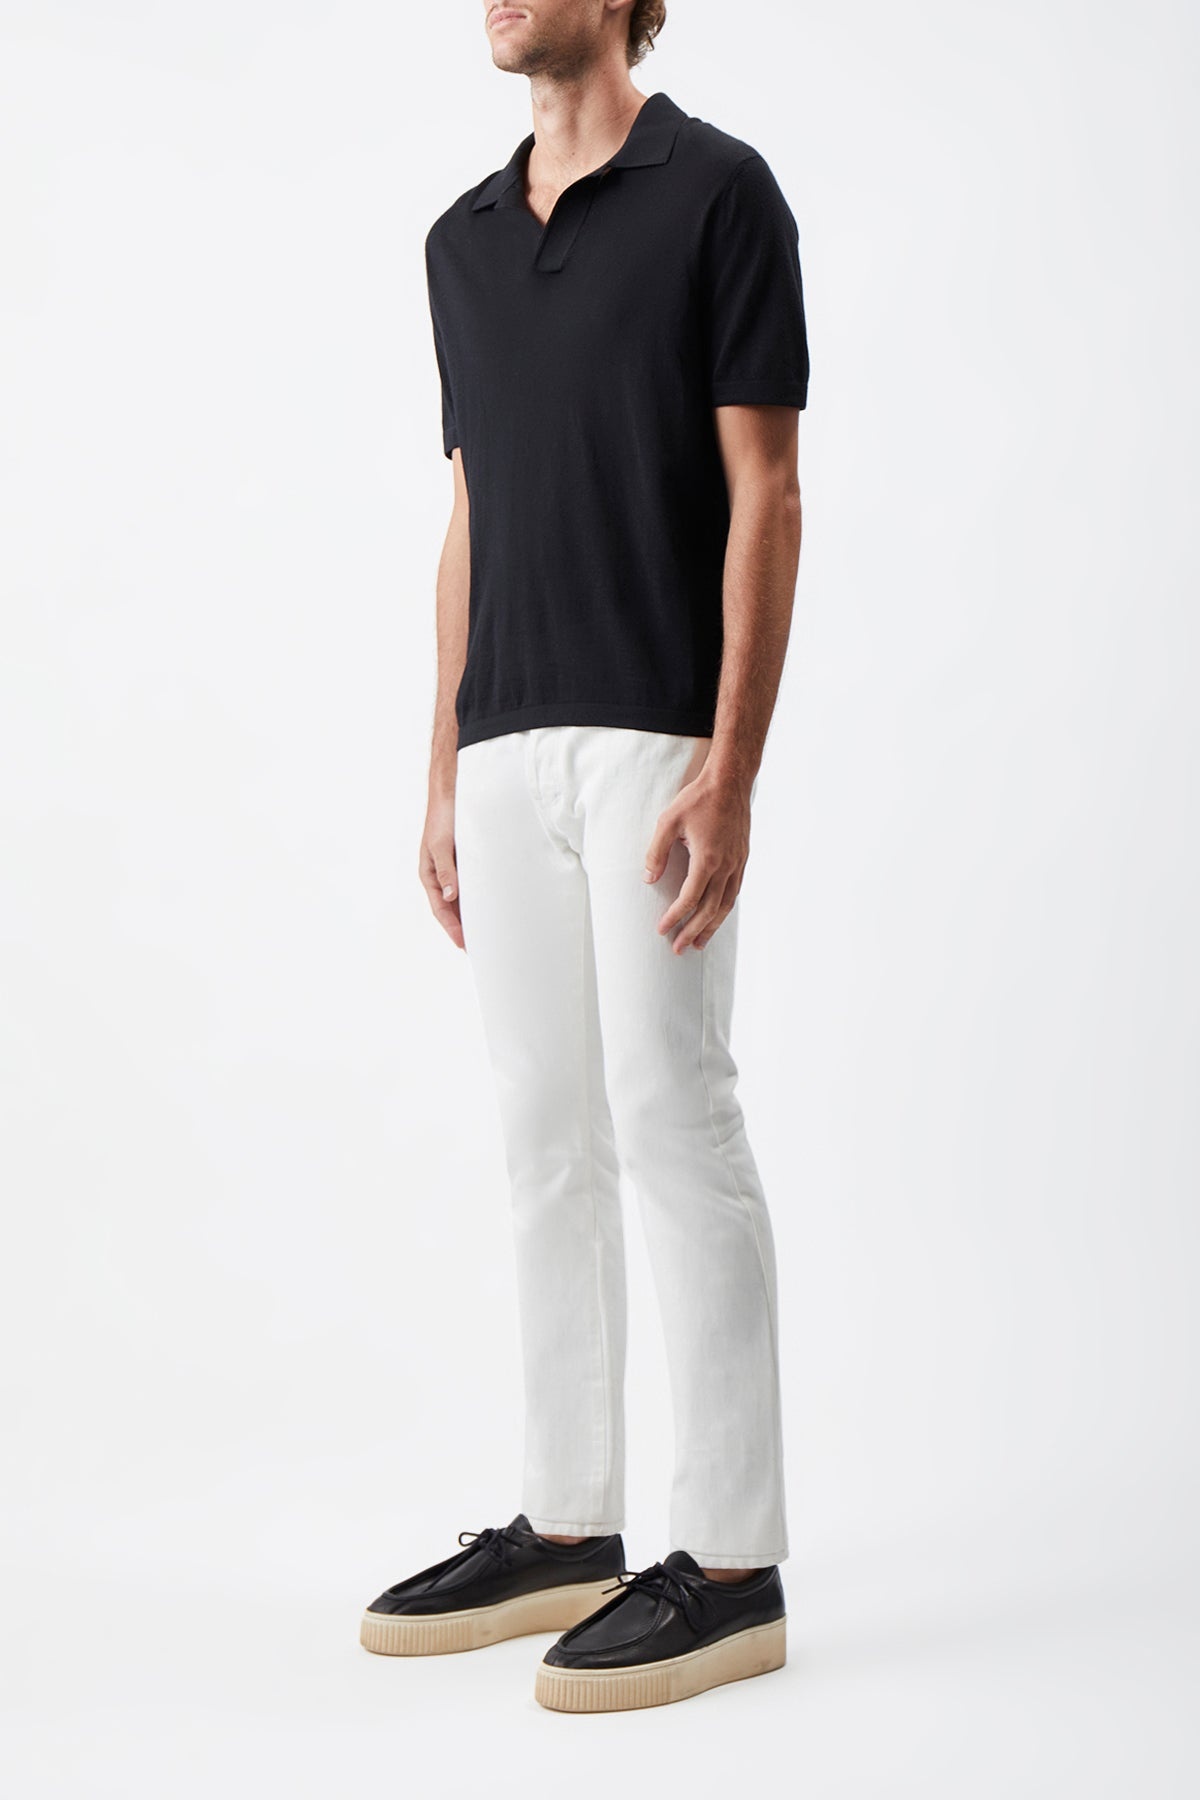 Stendhal Knit Short Sleeve Polo in Black Cashmere - 3